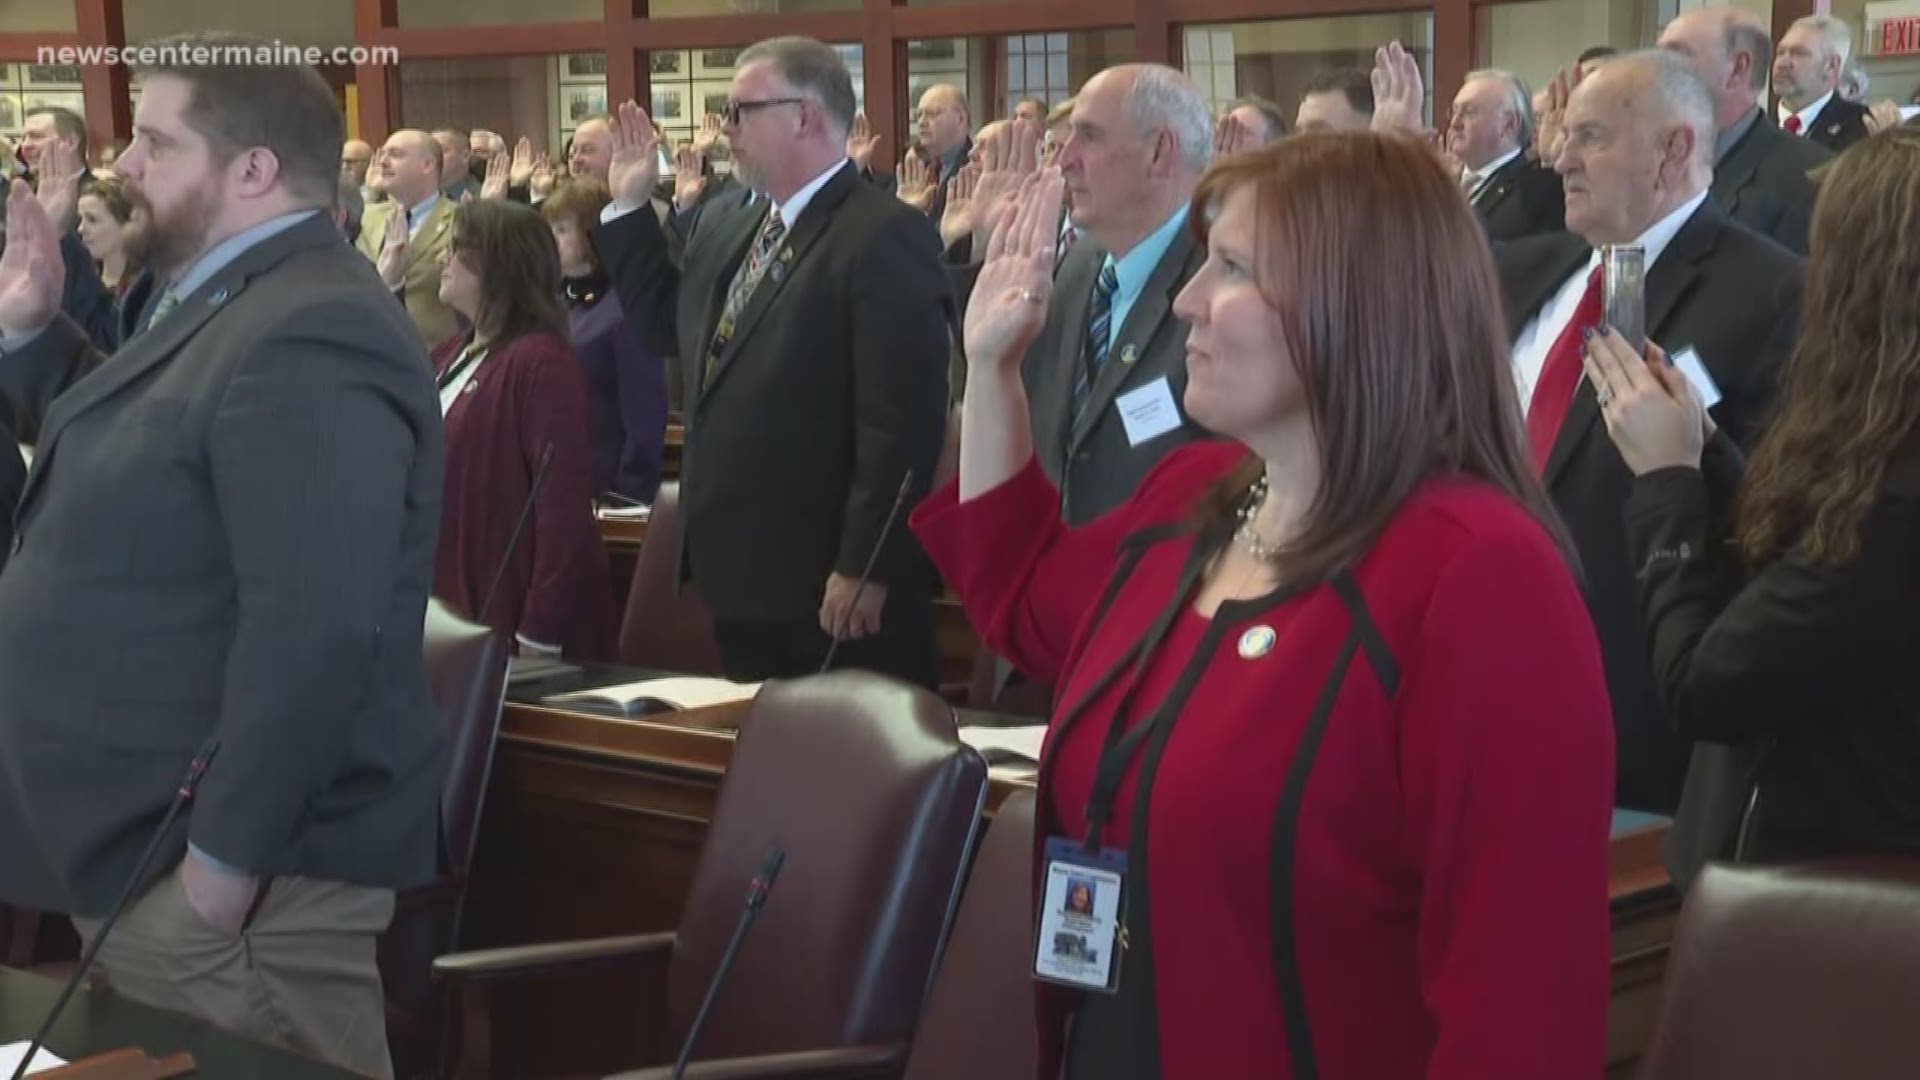 The new Maine Legislature is now officially in business. Lawmakers were sworn in today, with a new Democratic majority and a call from their leaders to forget the hard feelings of the past two years and work together.